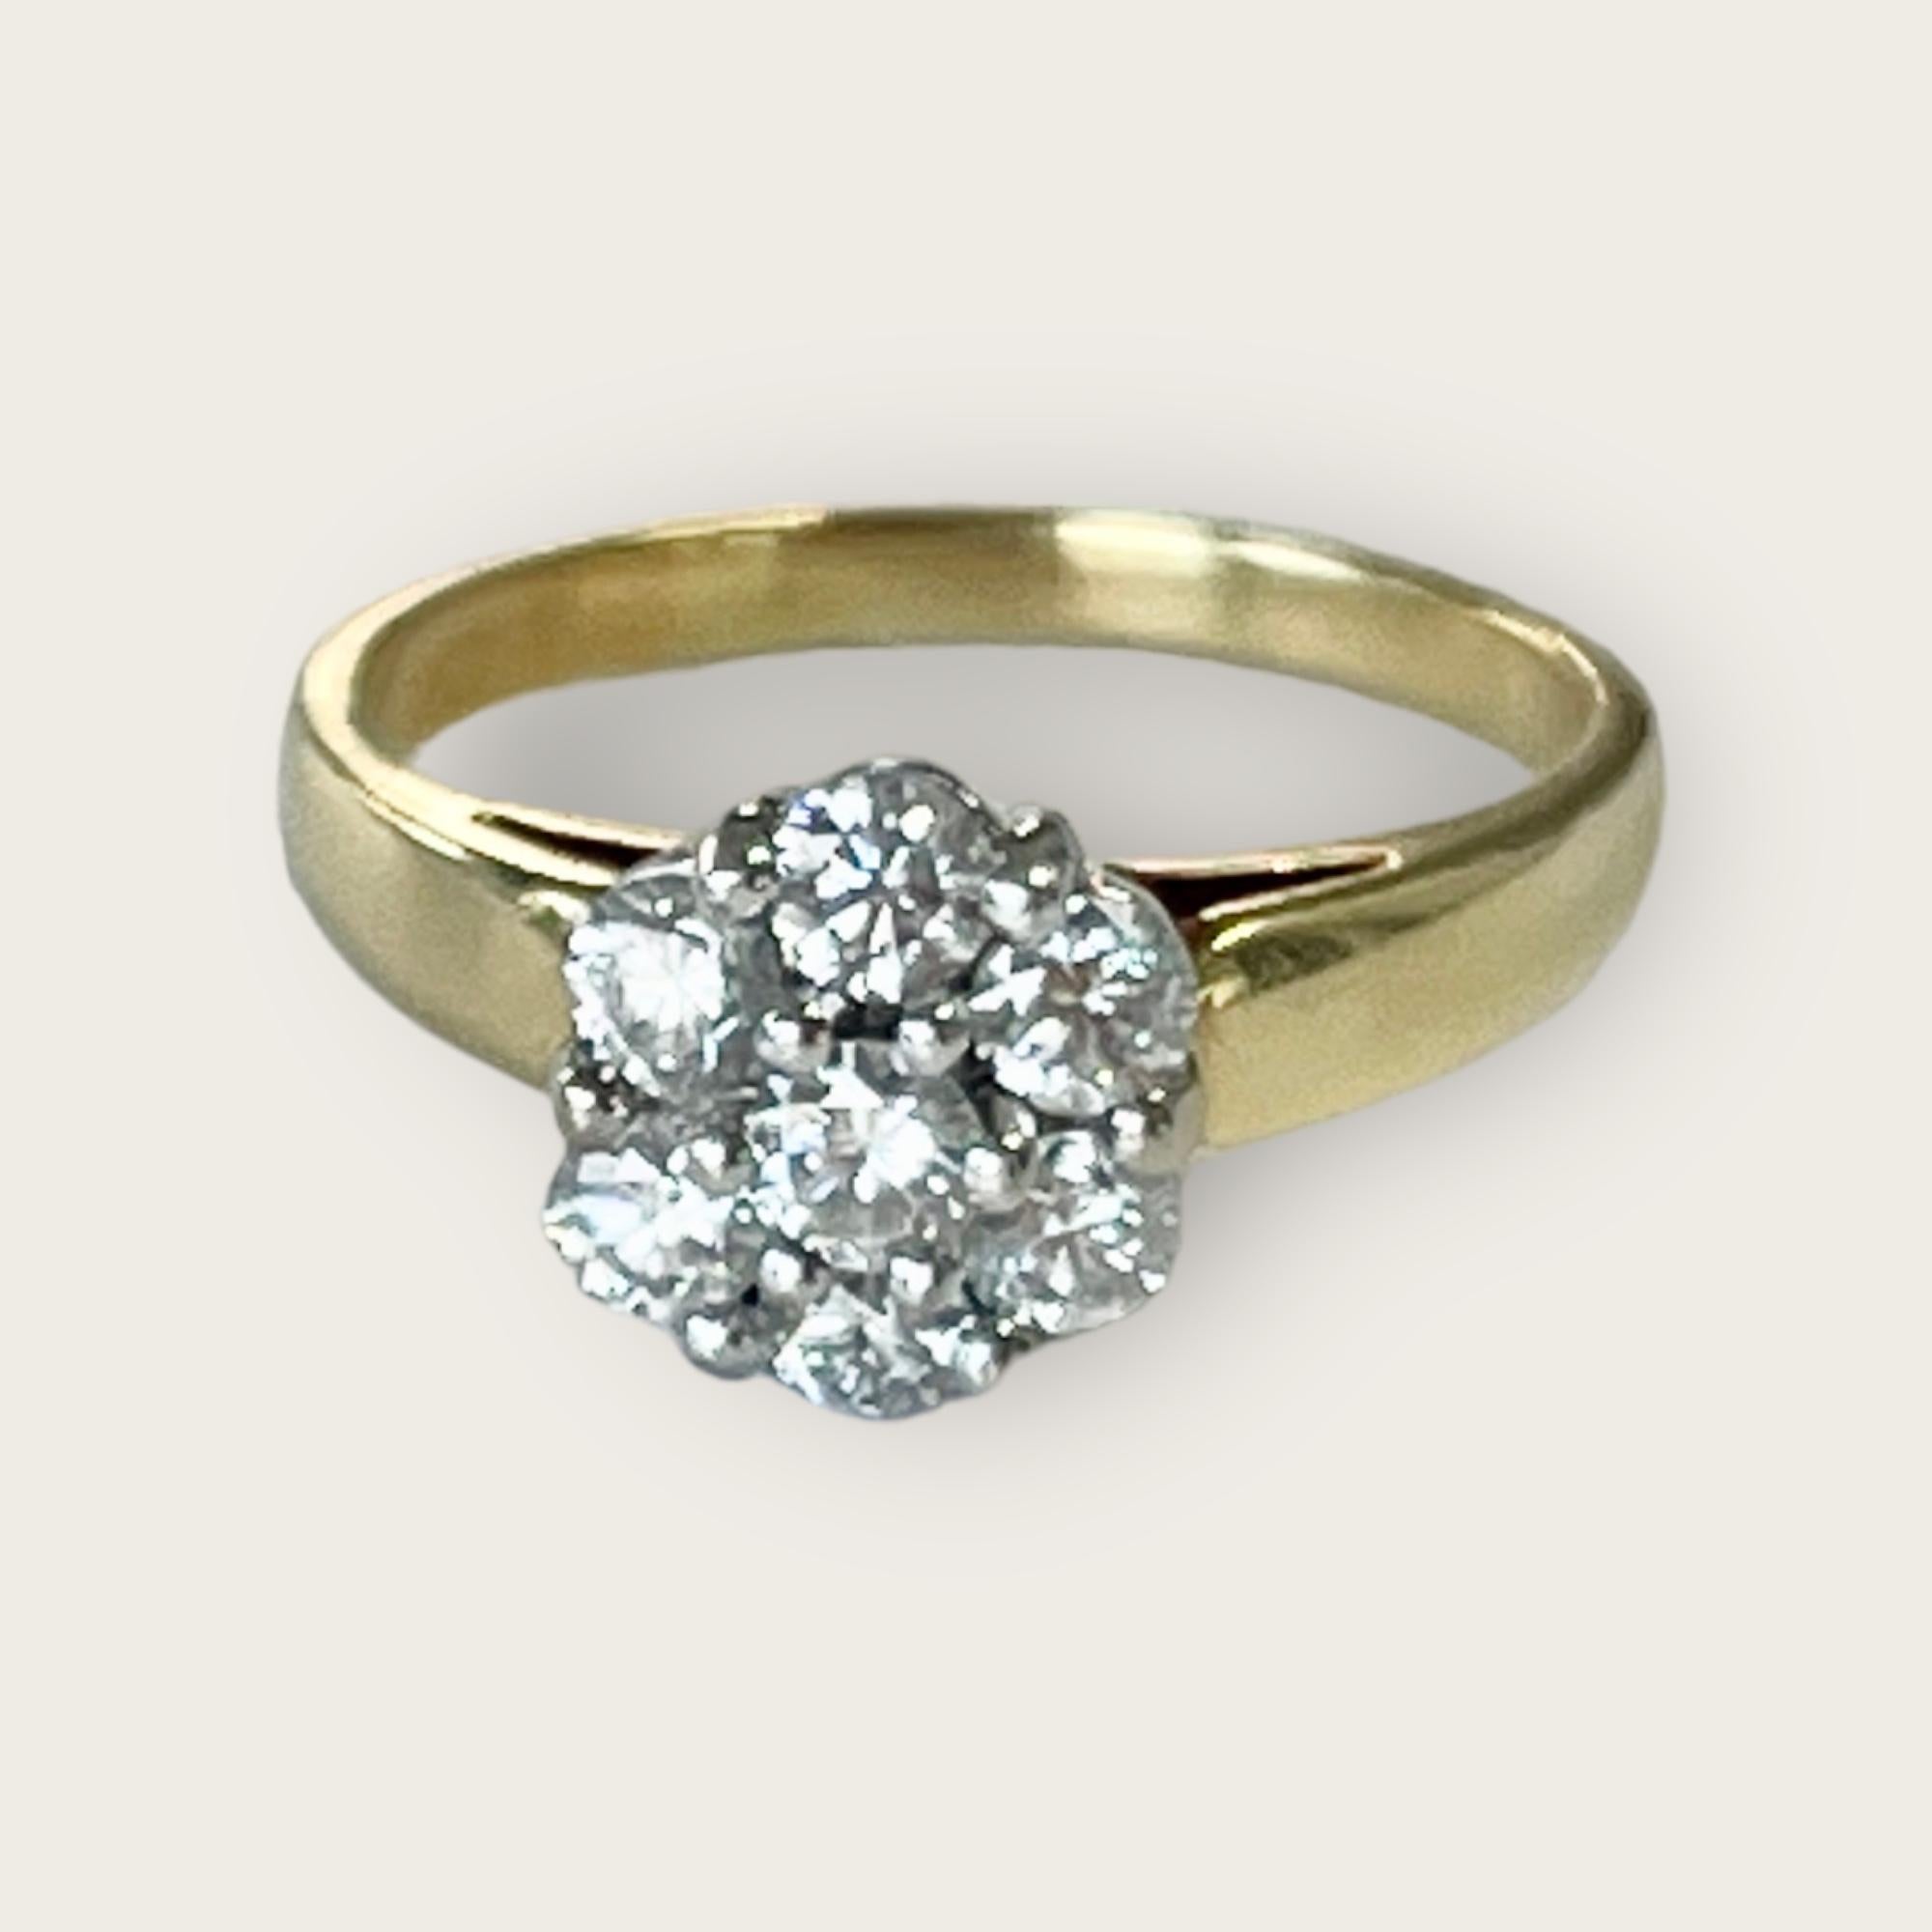 This is a gorgeous cluster Diamond ring.  Perfect to wear everyday.
It sparkles and shines with lovely, natural white Diamonds that are set in a flower cluster. The valuer has graded them colour G-H and clarity SI, so they are very nice quality.